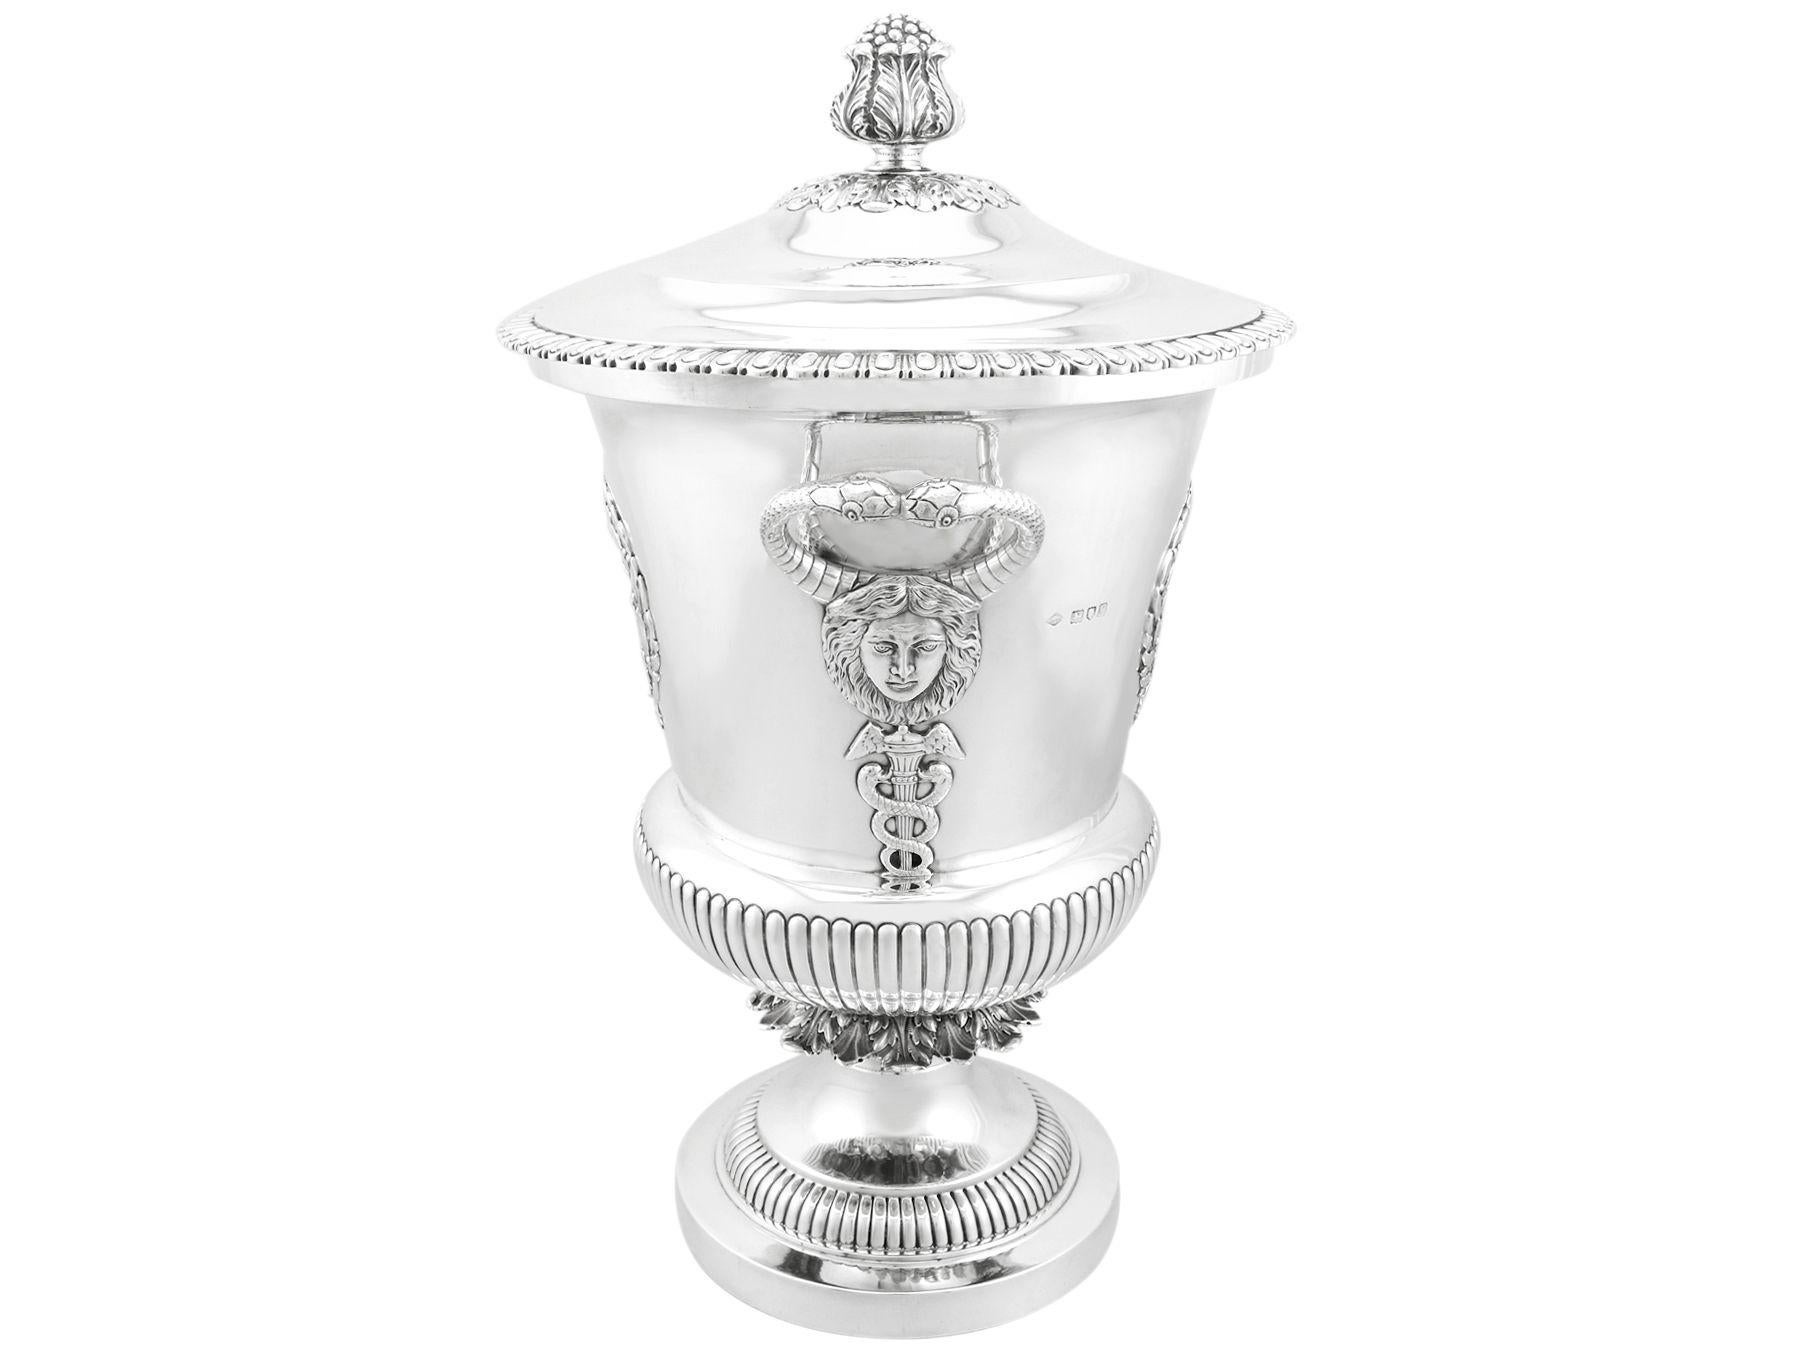 English 1900s Edwardian Sterling Silver Presentation Cup and Cover For Sale